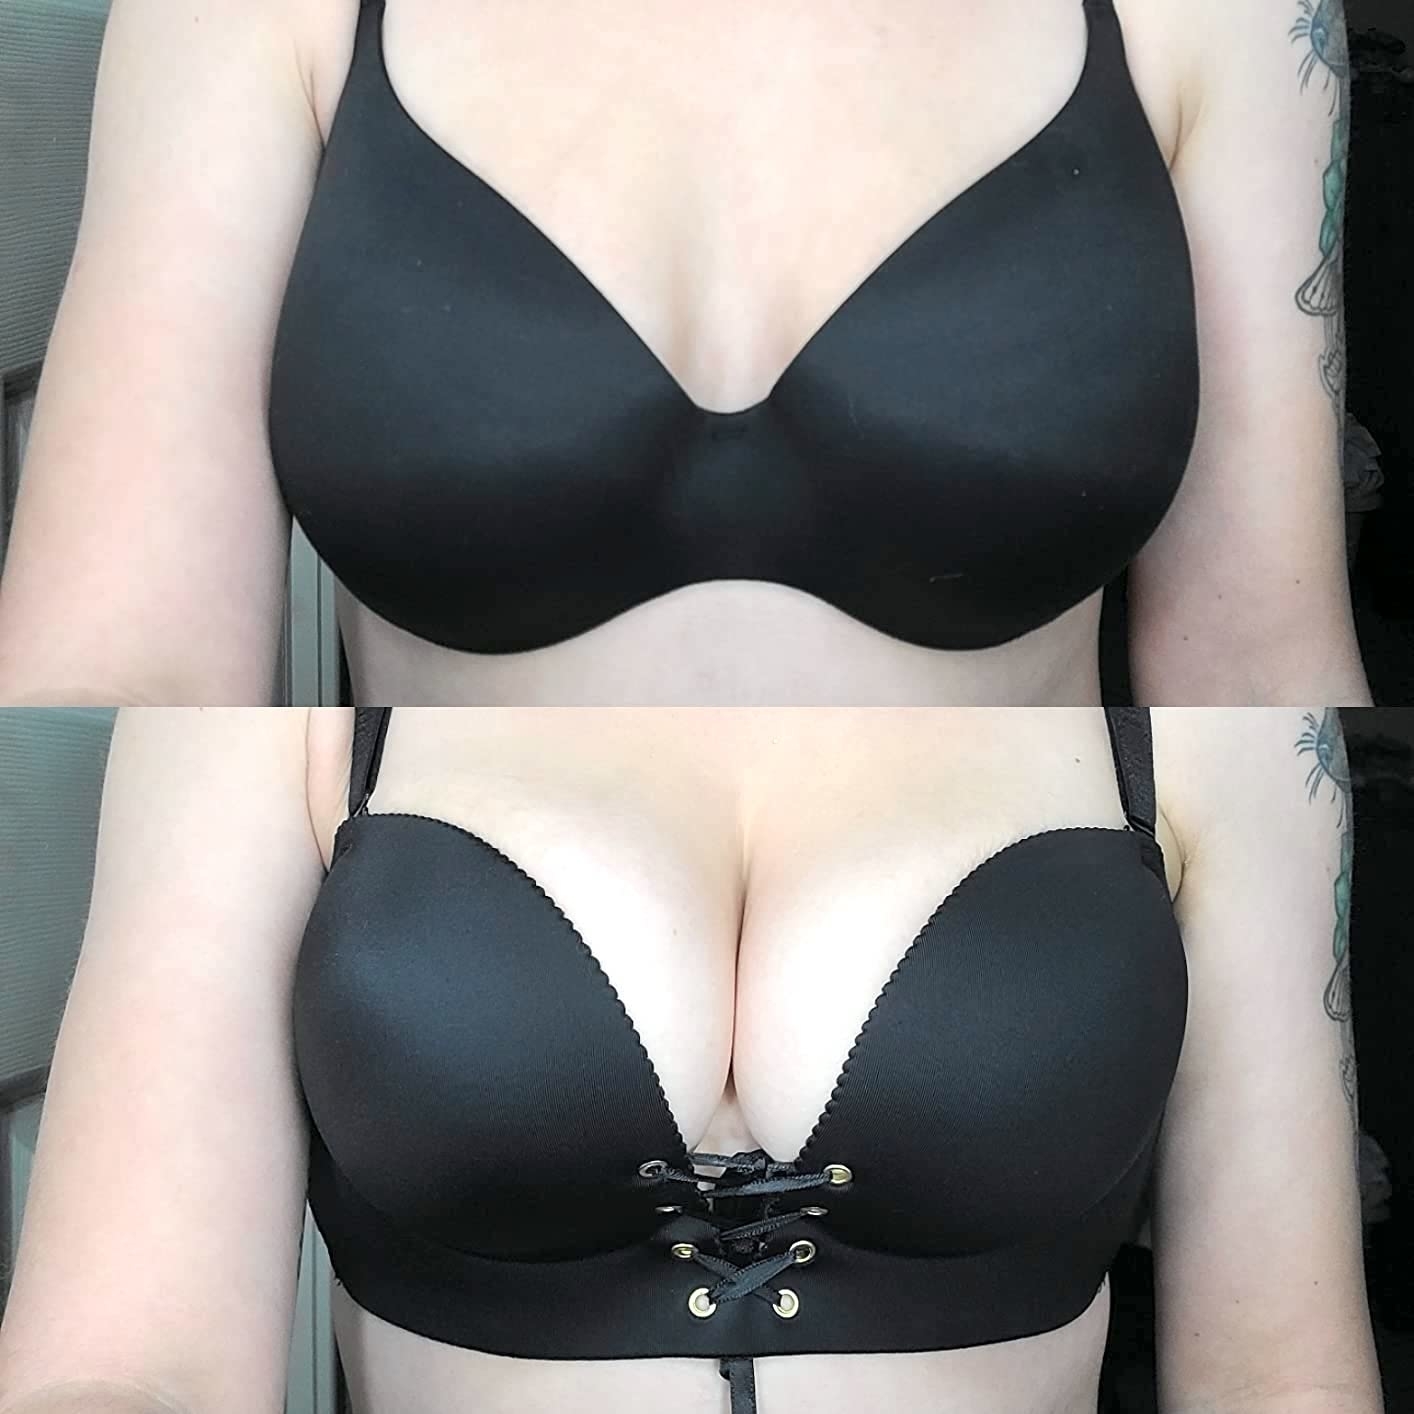 Woman wearing two styles of black bras for comparison, top has full coverage, bottom features a plunge design with lacing detail that lifts both boobs like a push-up